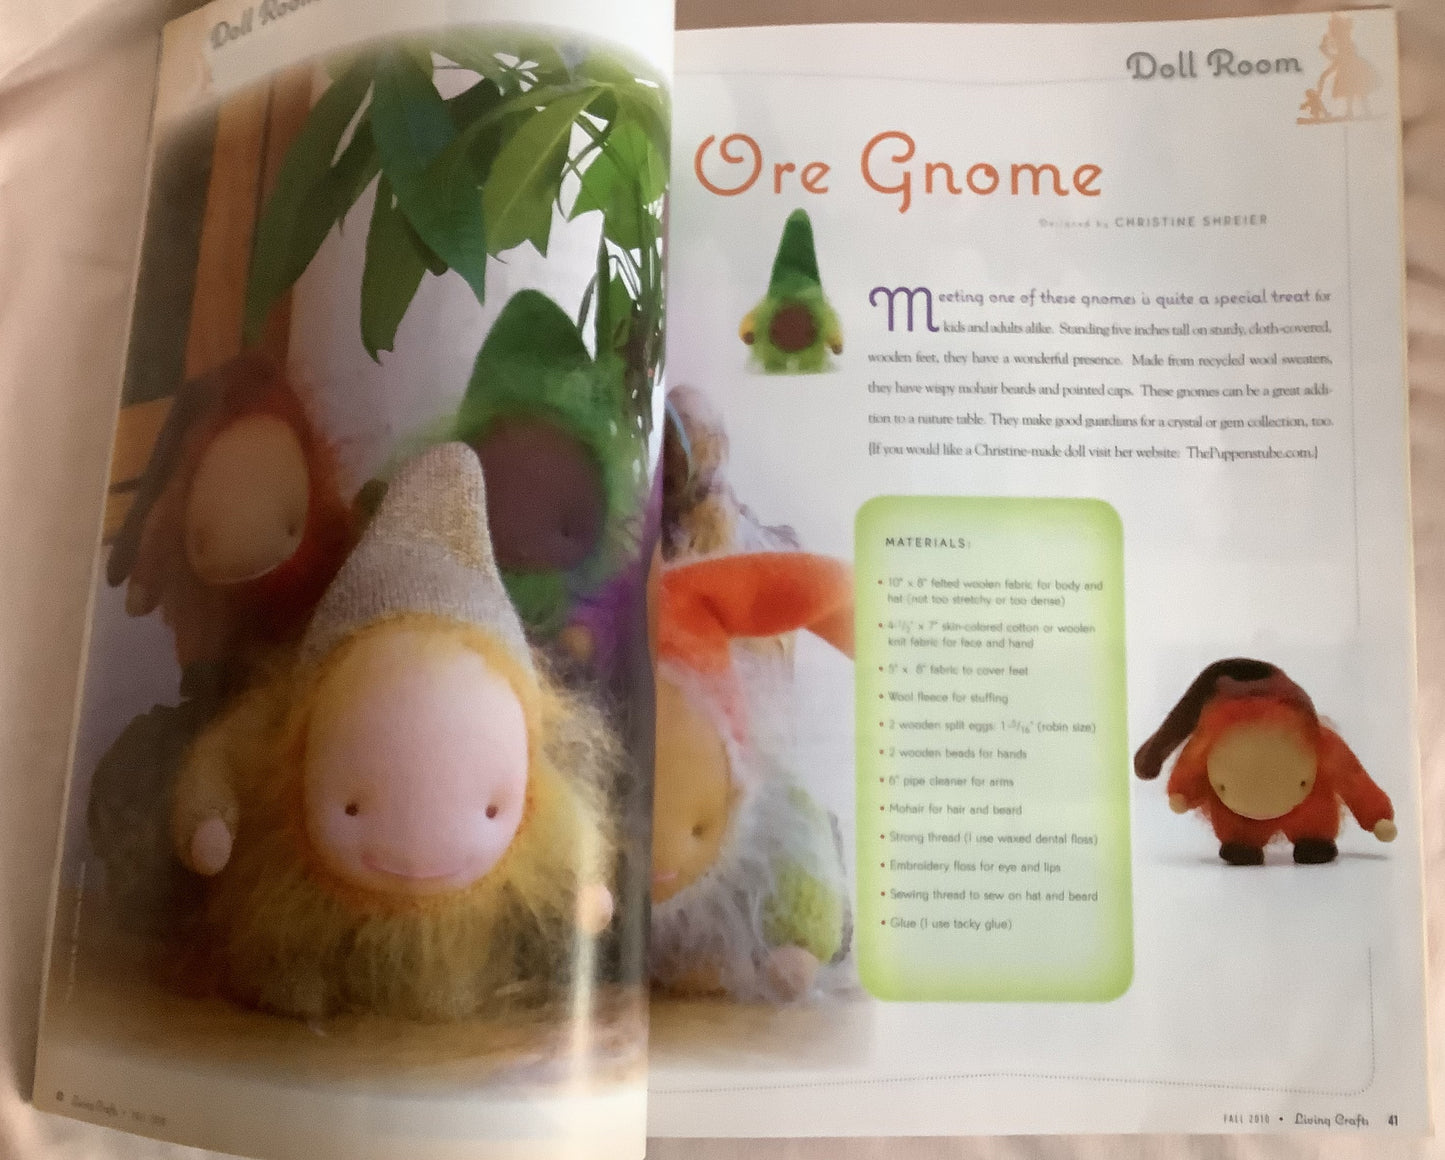 Living Crafts Magazine Fall 2010 with Ore Gnome Instructions